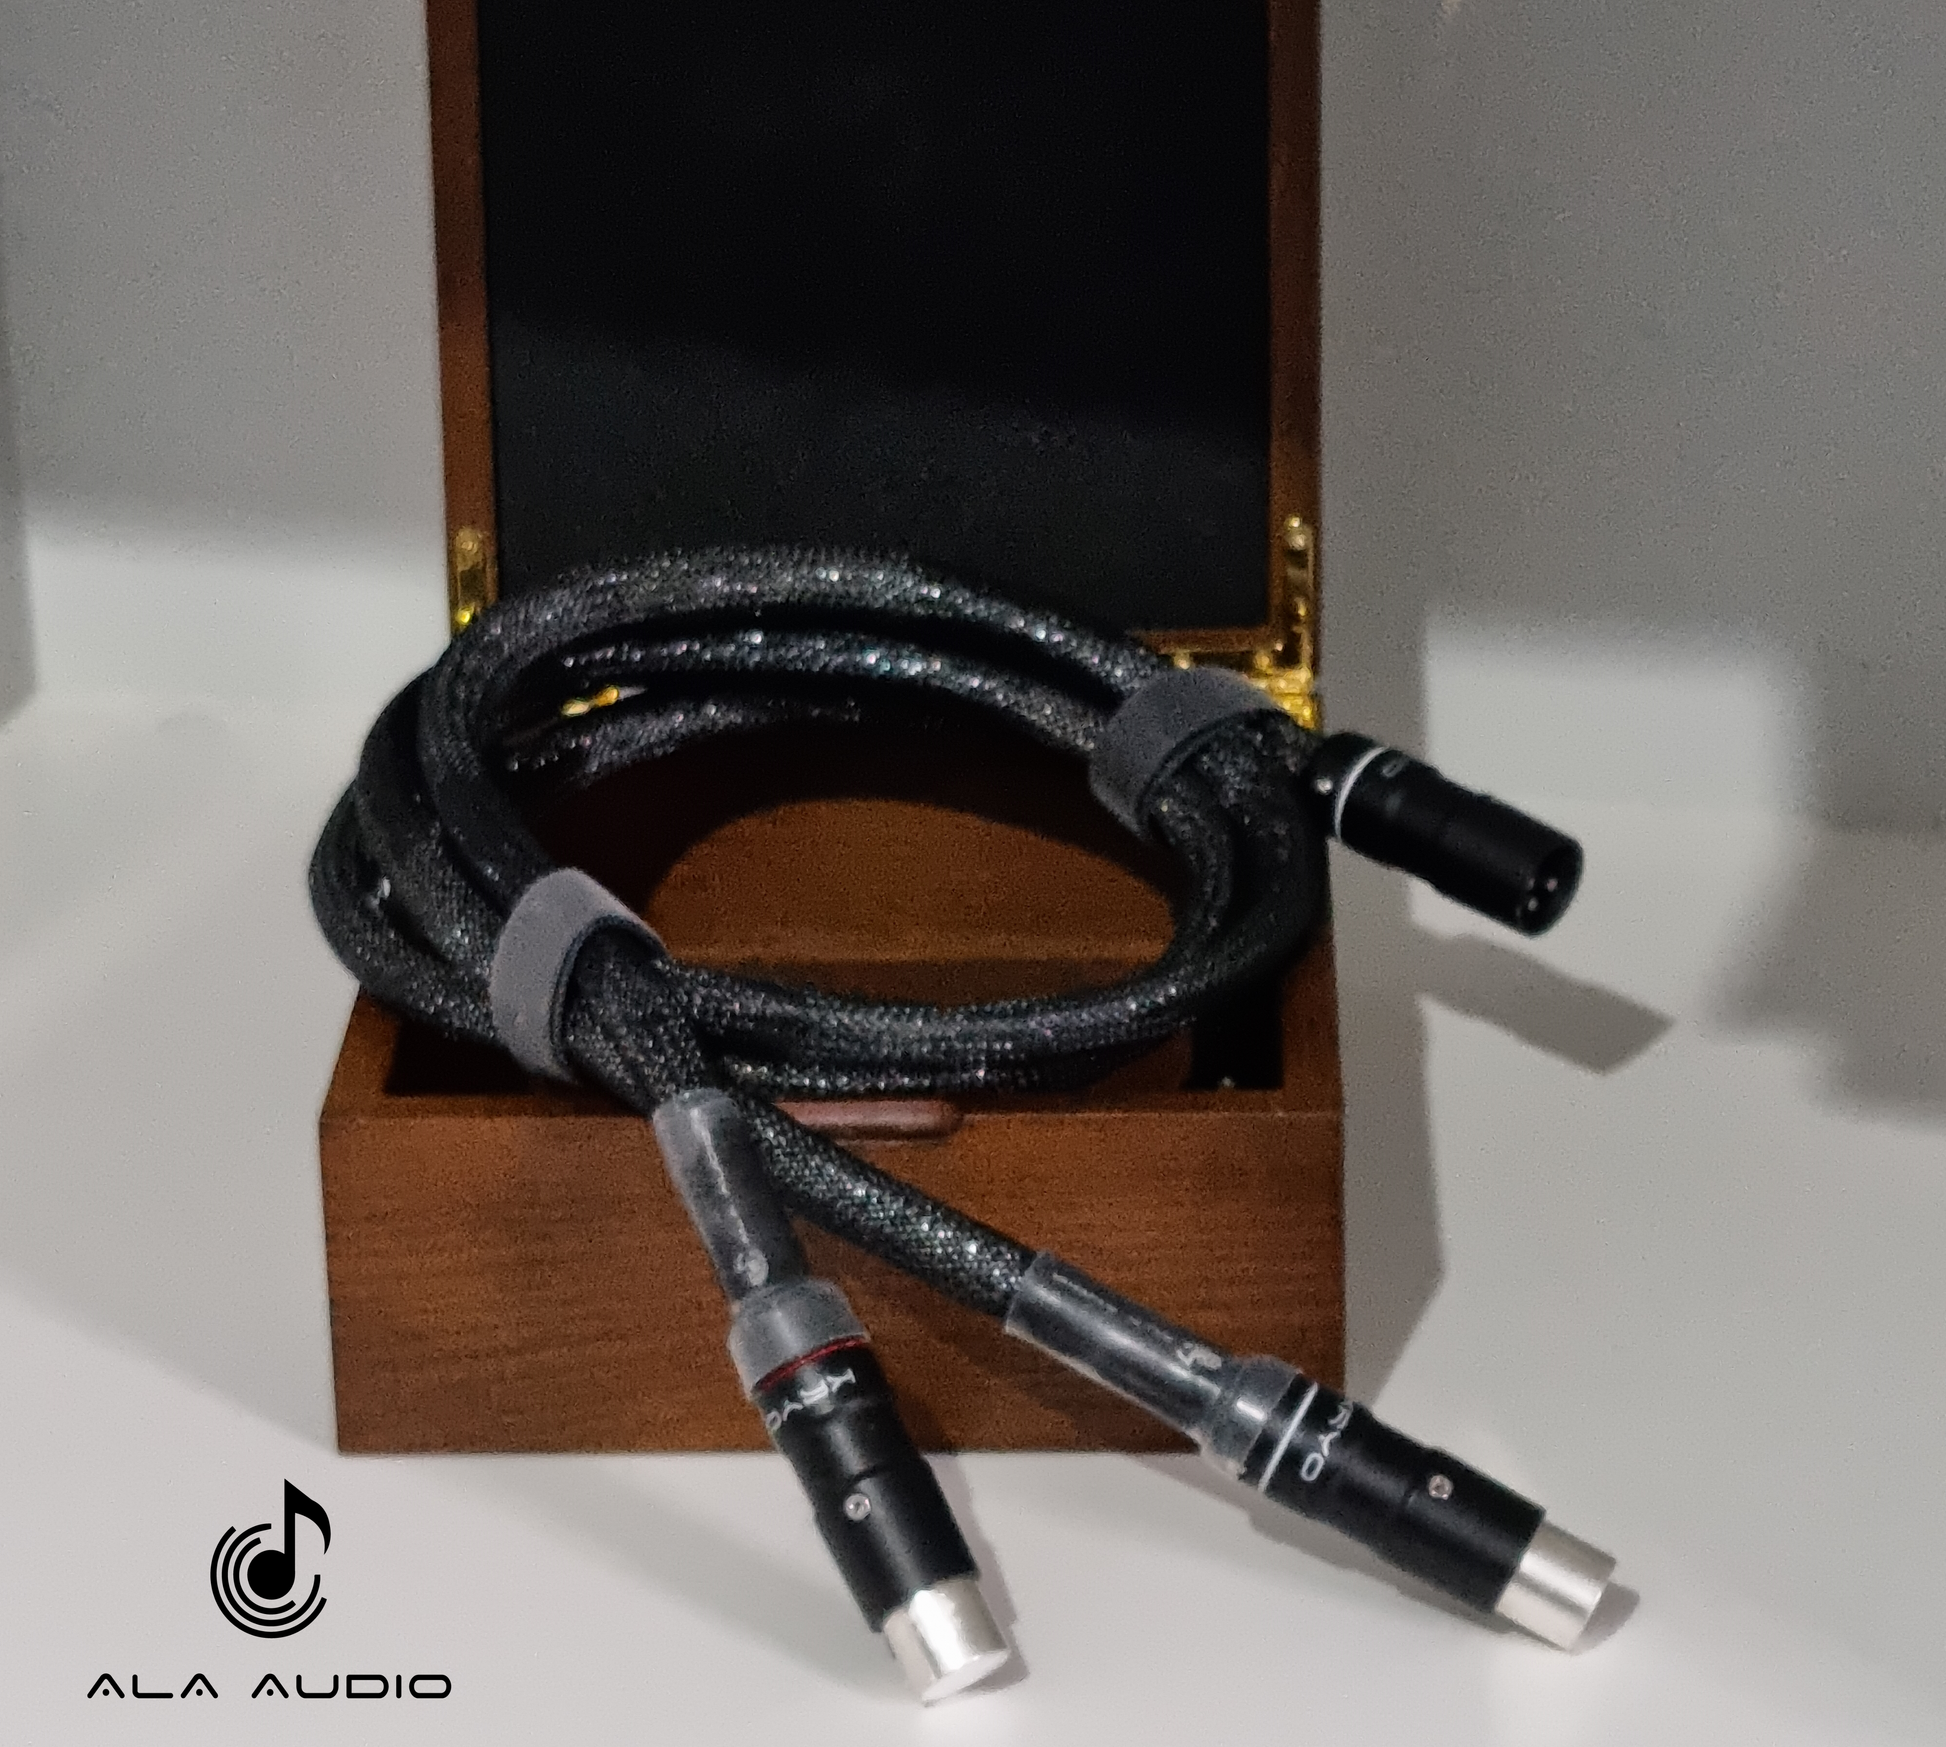 Ethereal Pure-Silver XLR Cable A.L.A Audio